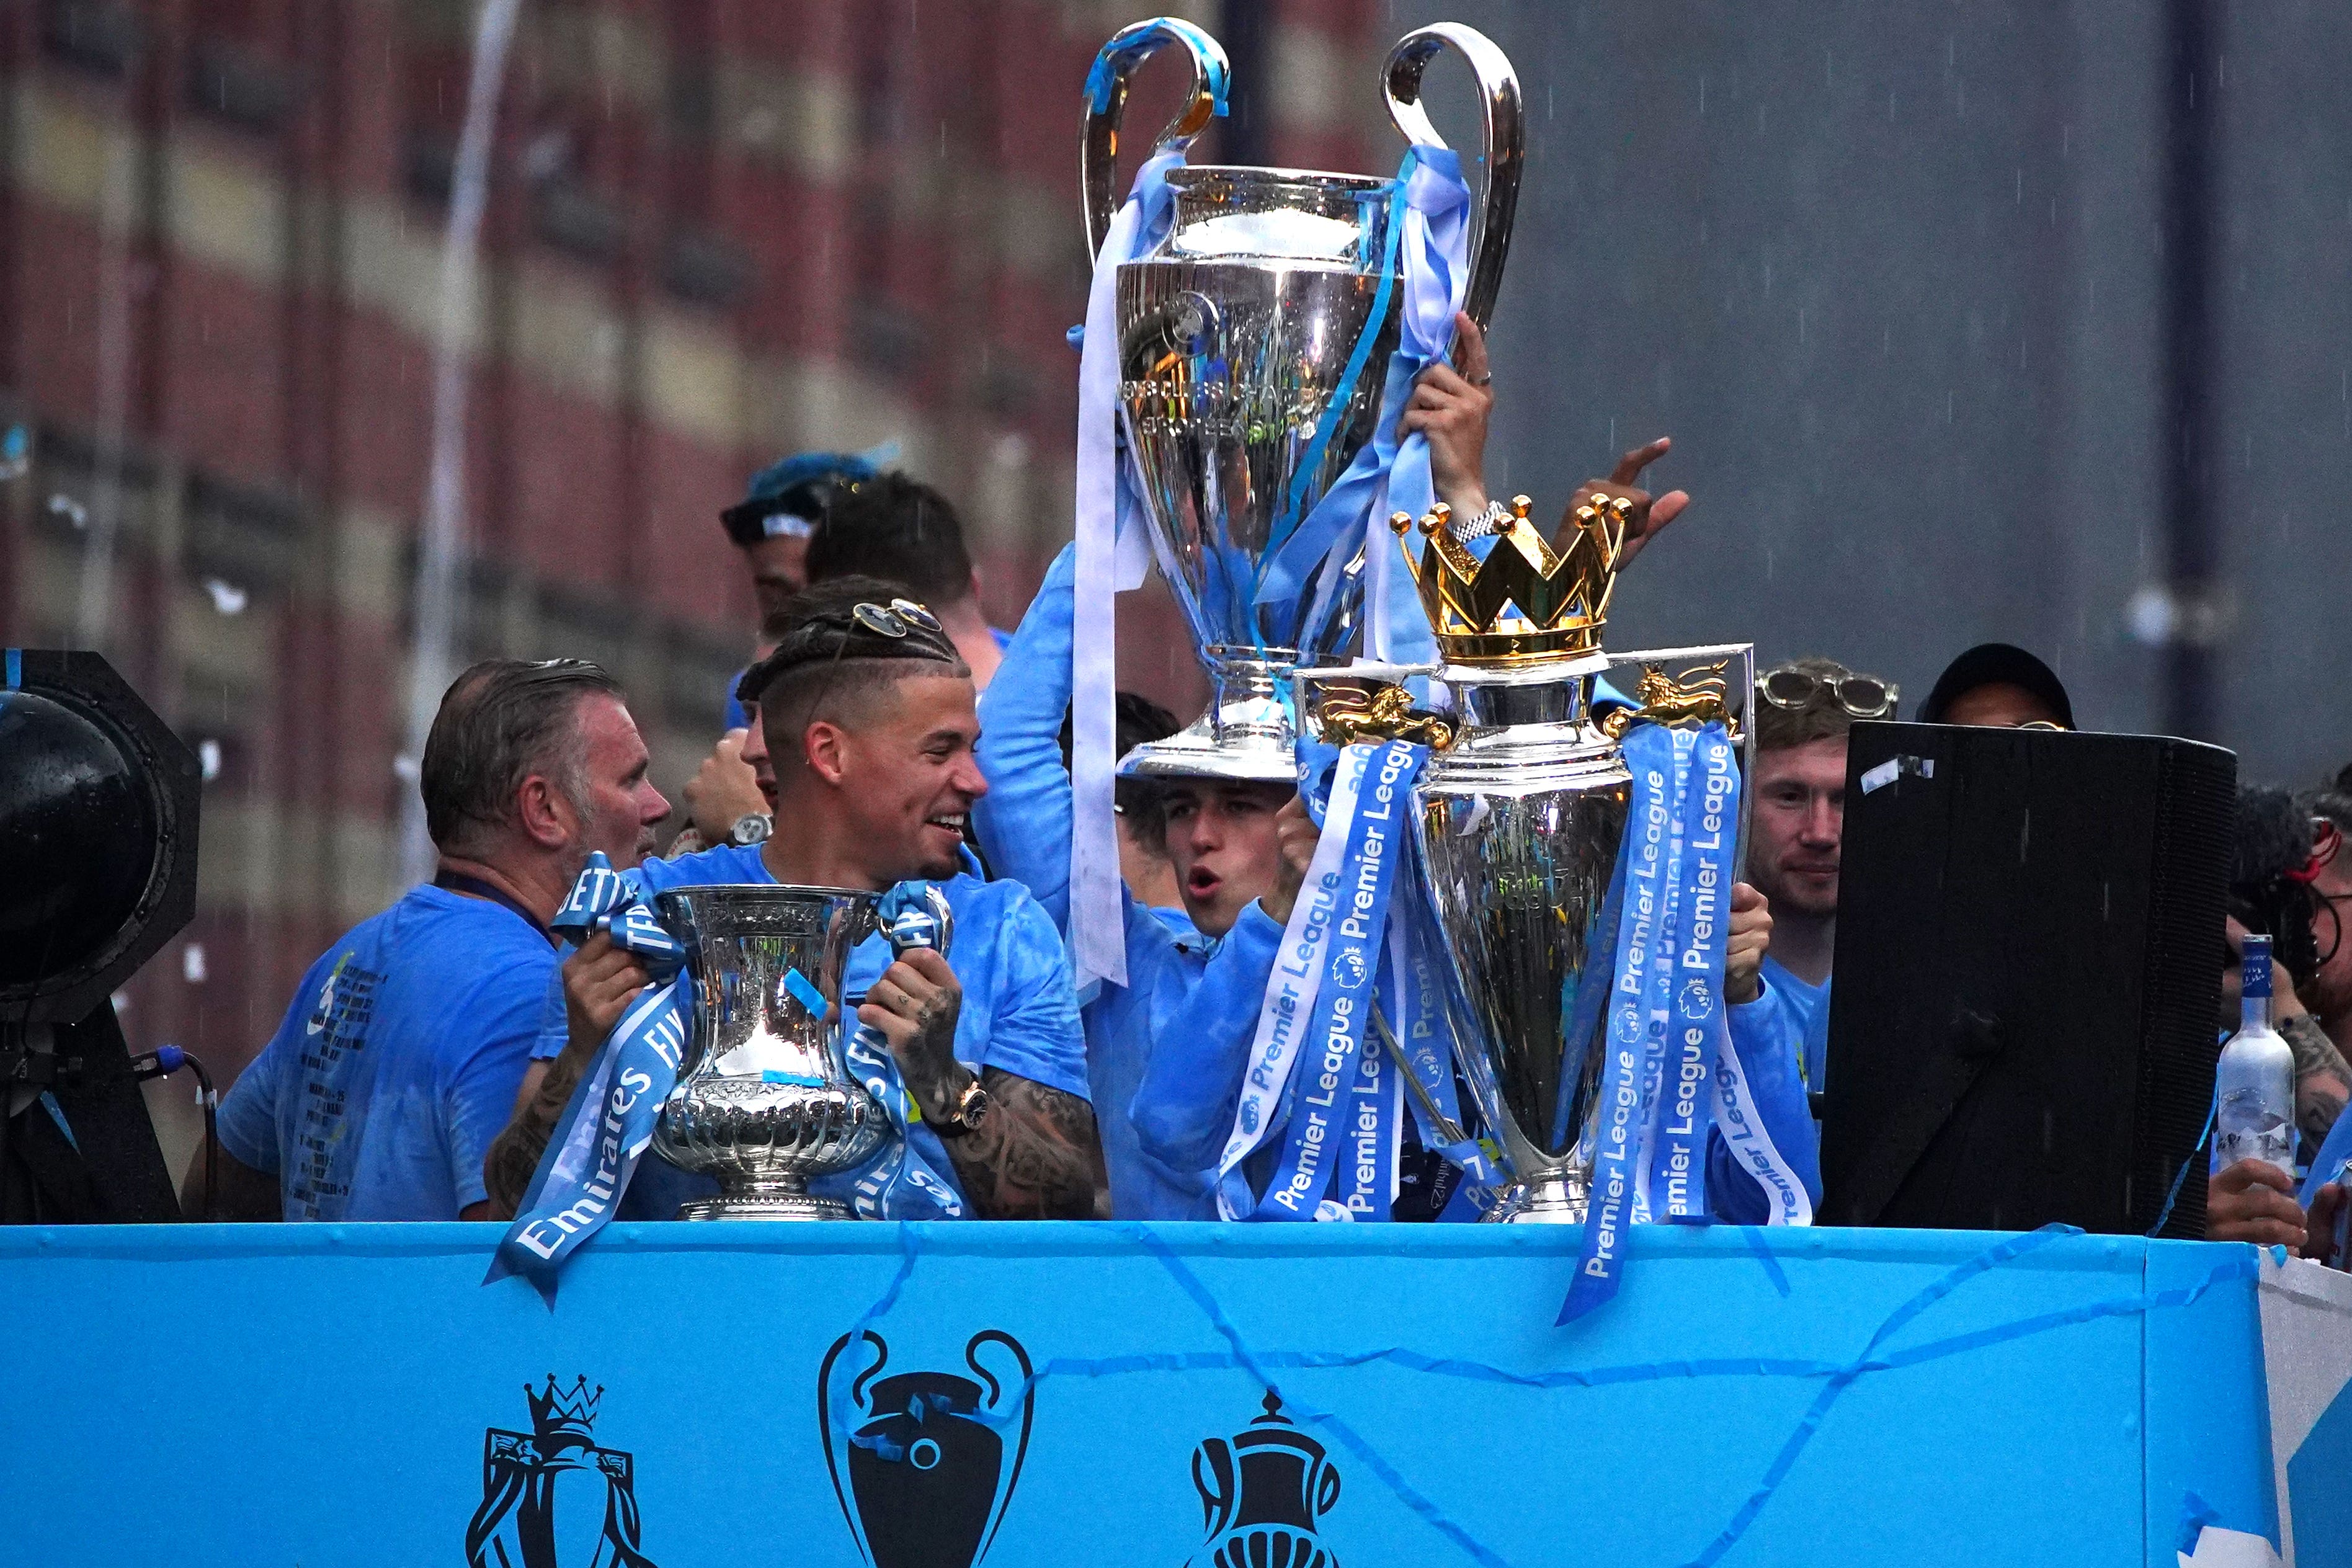 Three trophies and four starts: How Kalvin Phillips can bounce back at Man  City